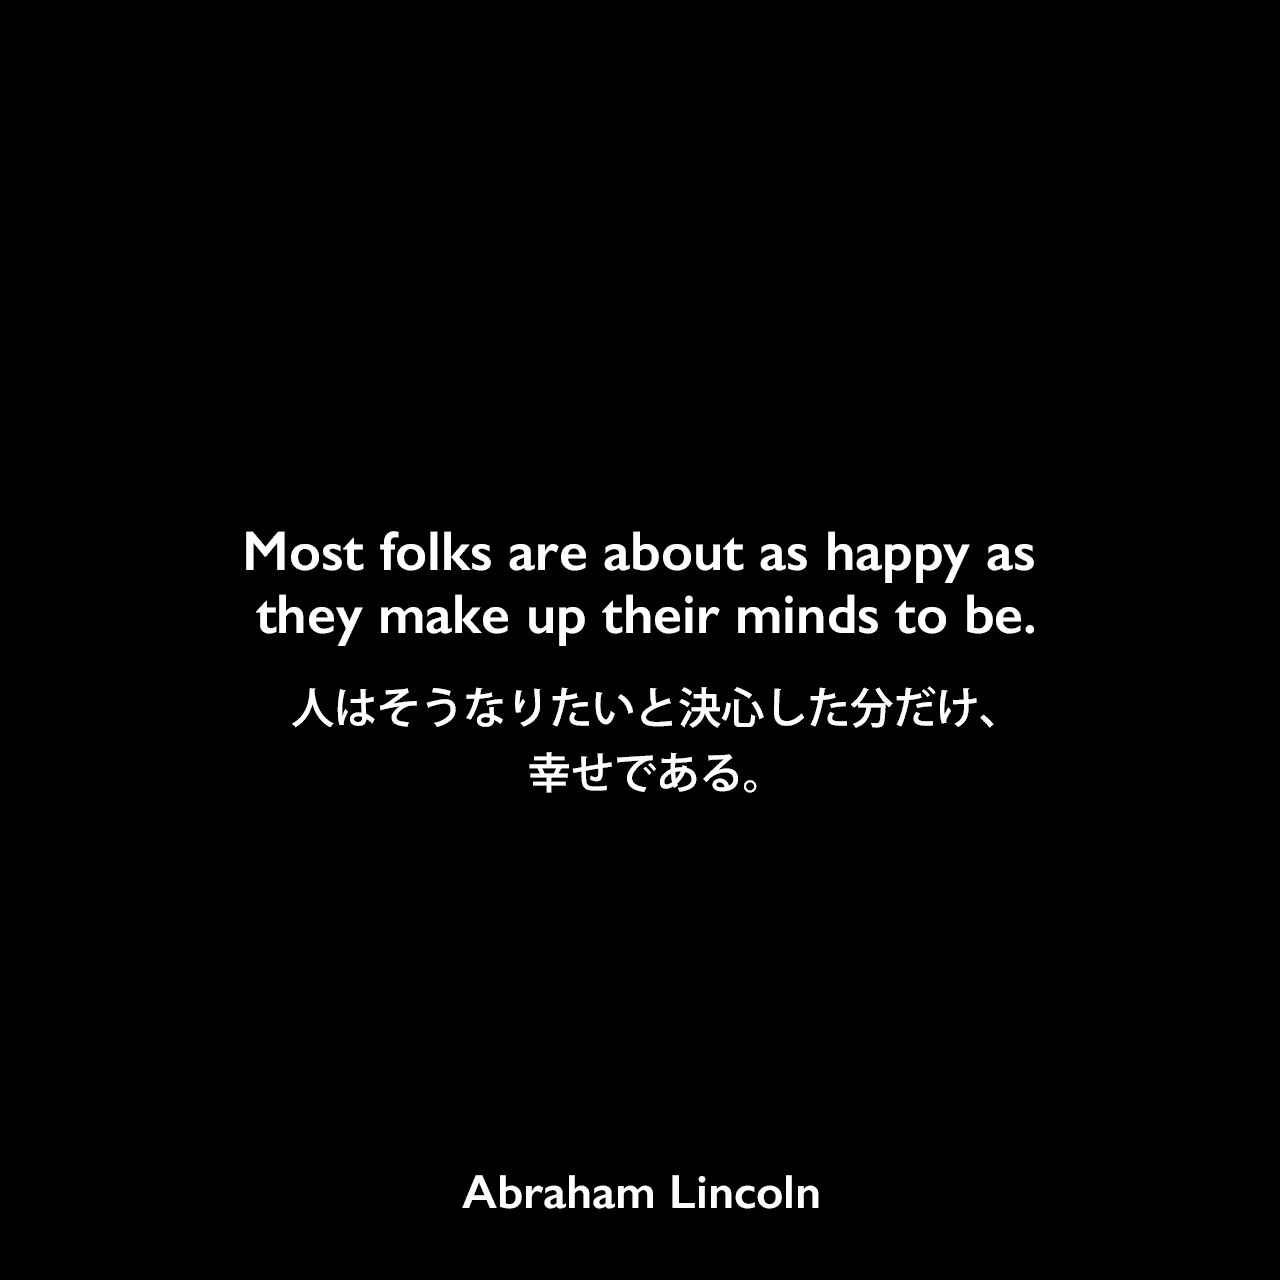 Most folks are about as happy as they make up their minds to be.人はそうなりたいと決心した分だけ、幸せである。Abraham Lincoln